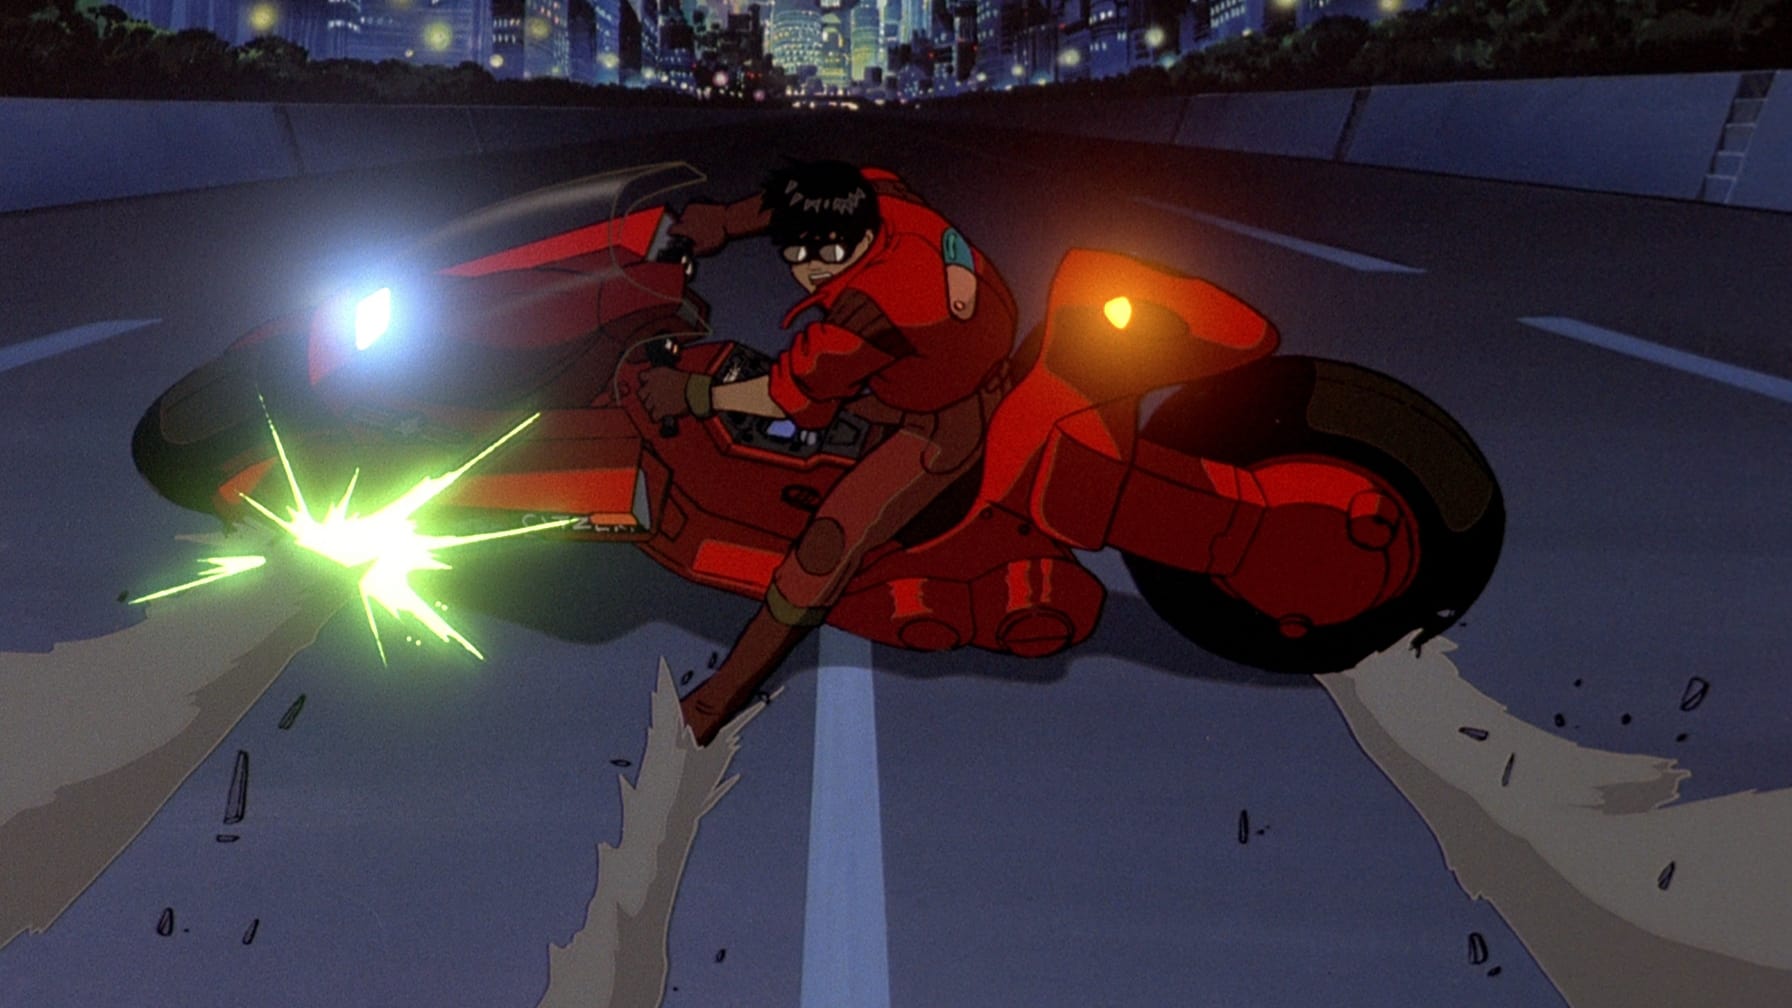 Screencap from the movie AKIRA that shows a young man in red motorcycle gear. He is sliding on a red motorbike on the highway of a futuristic city at night.